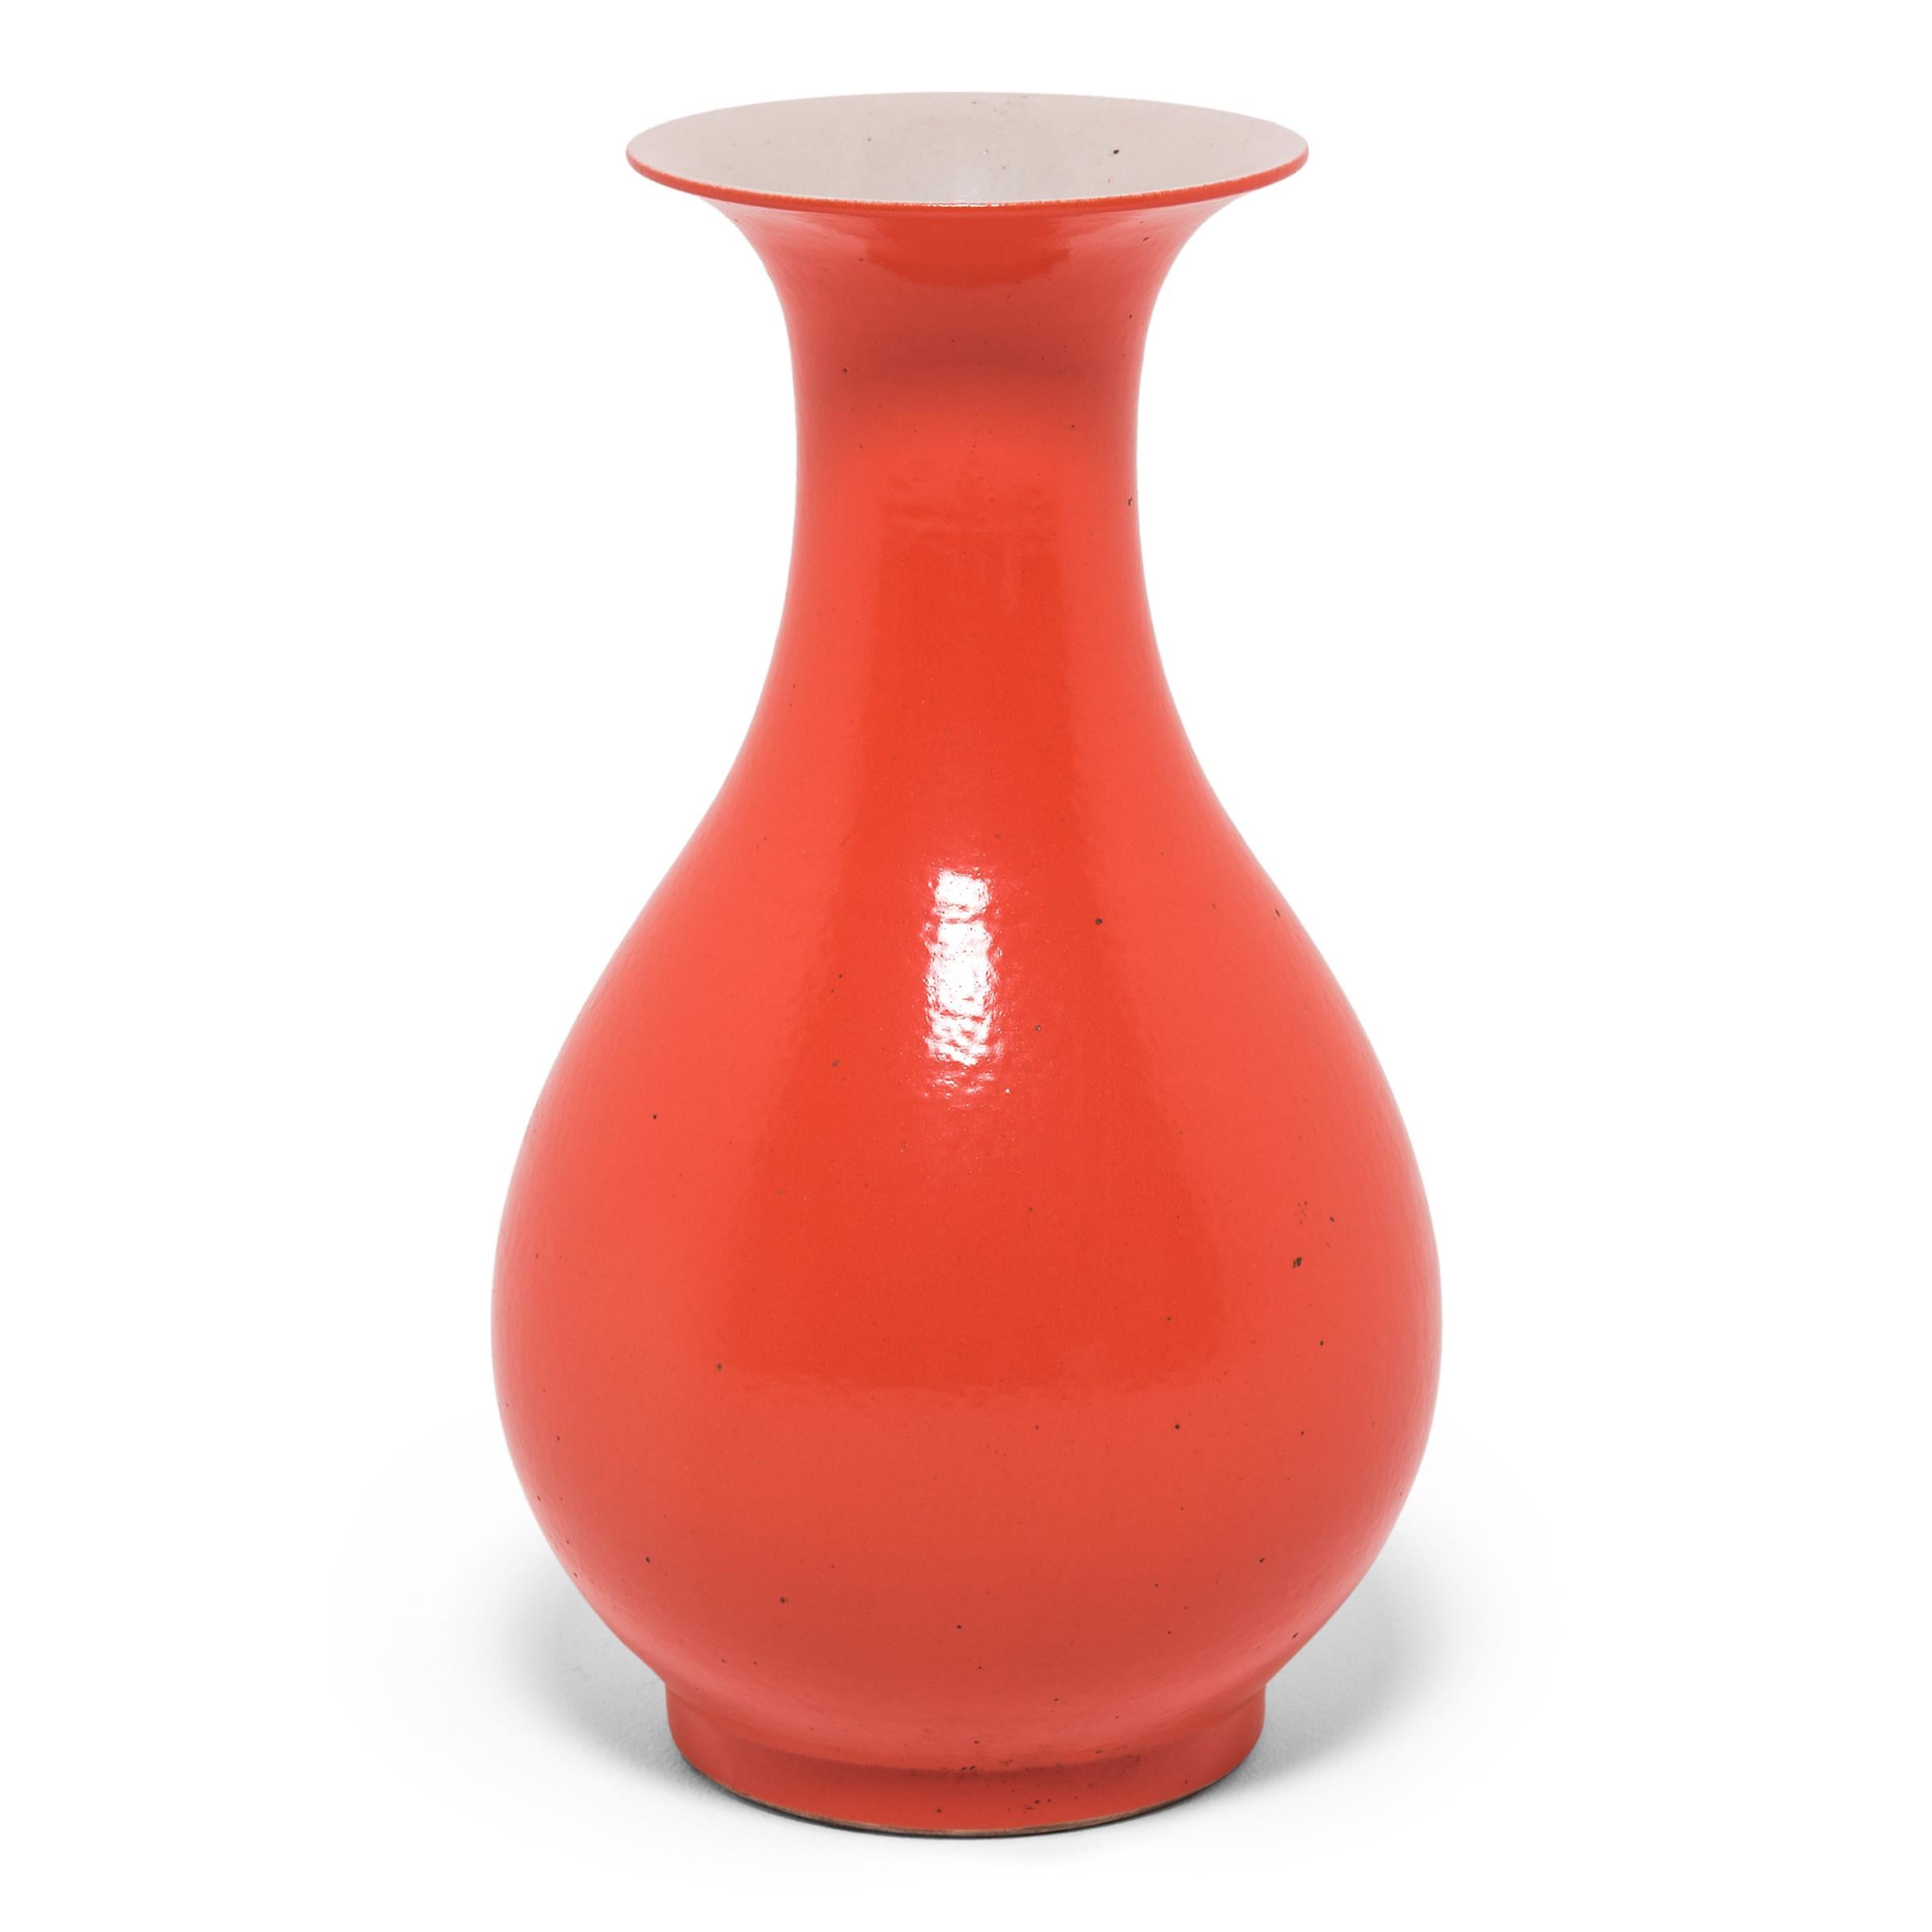 The striking monochrome of this vase draws on a long Chinese tradition of ceramics glazed in a single, statement-making color. The gracefully curved form of this porcelain vase is enlivened by a vibrant orange glaze inspired by the persimmon, an